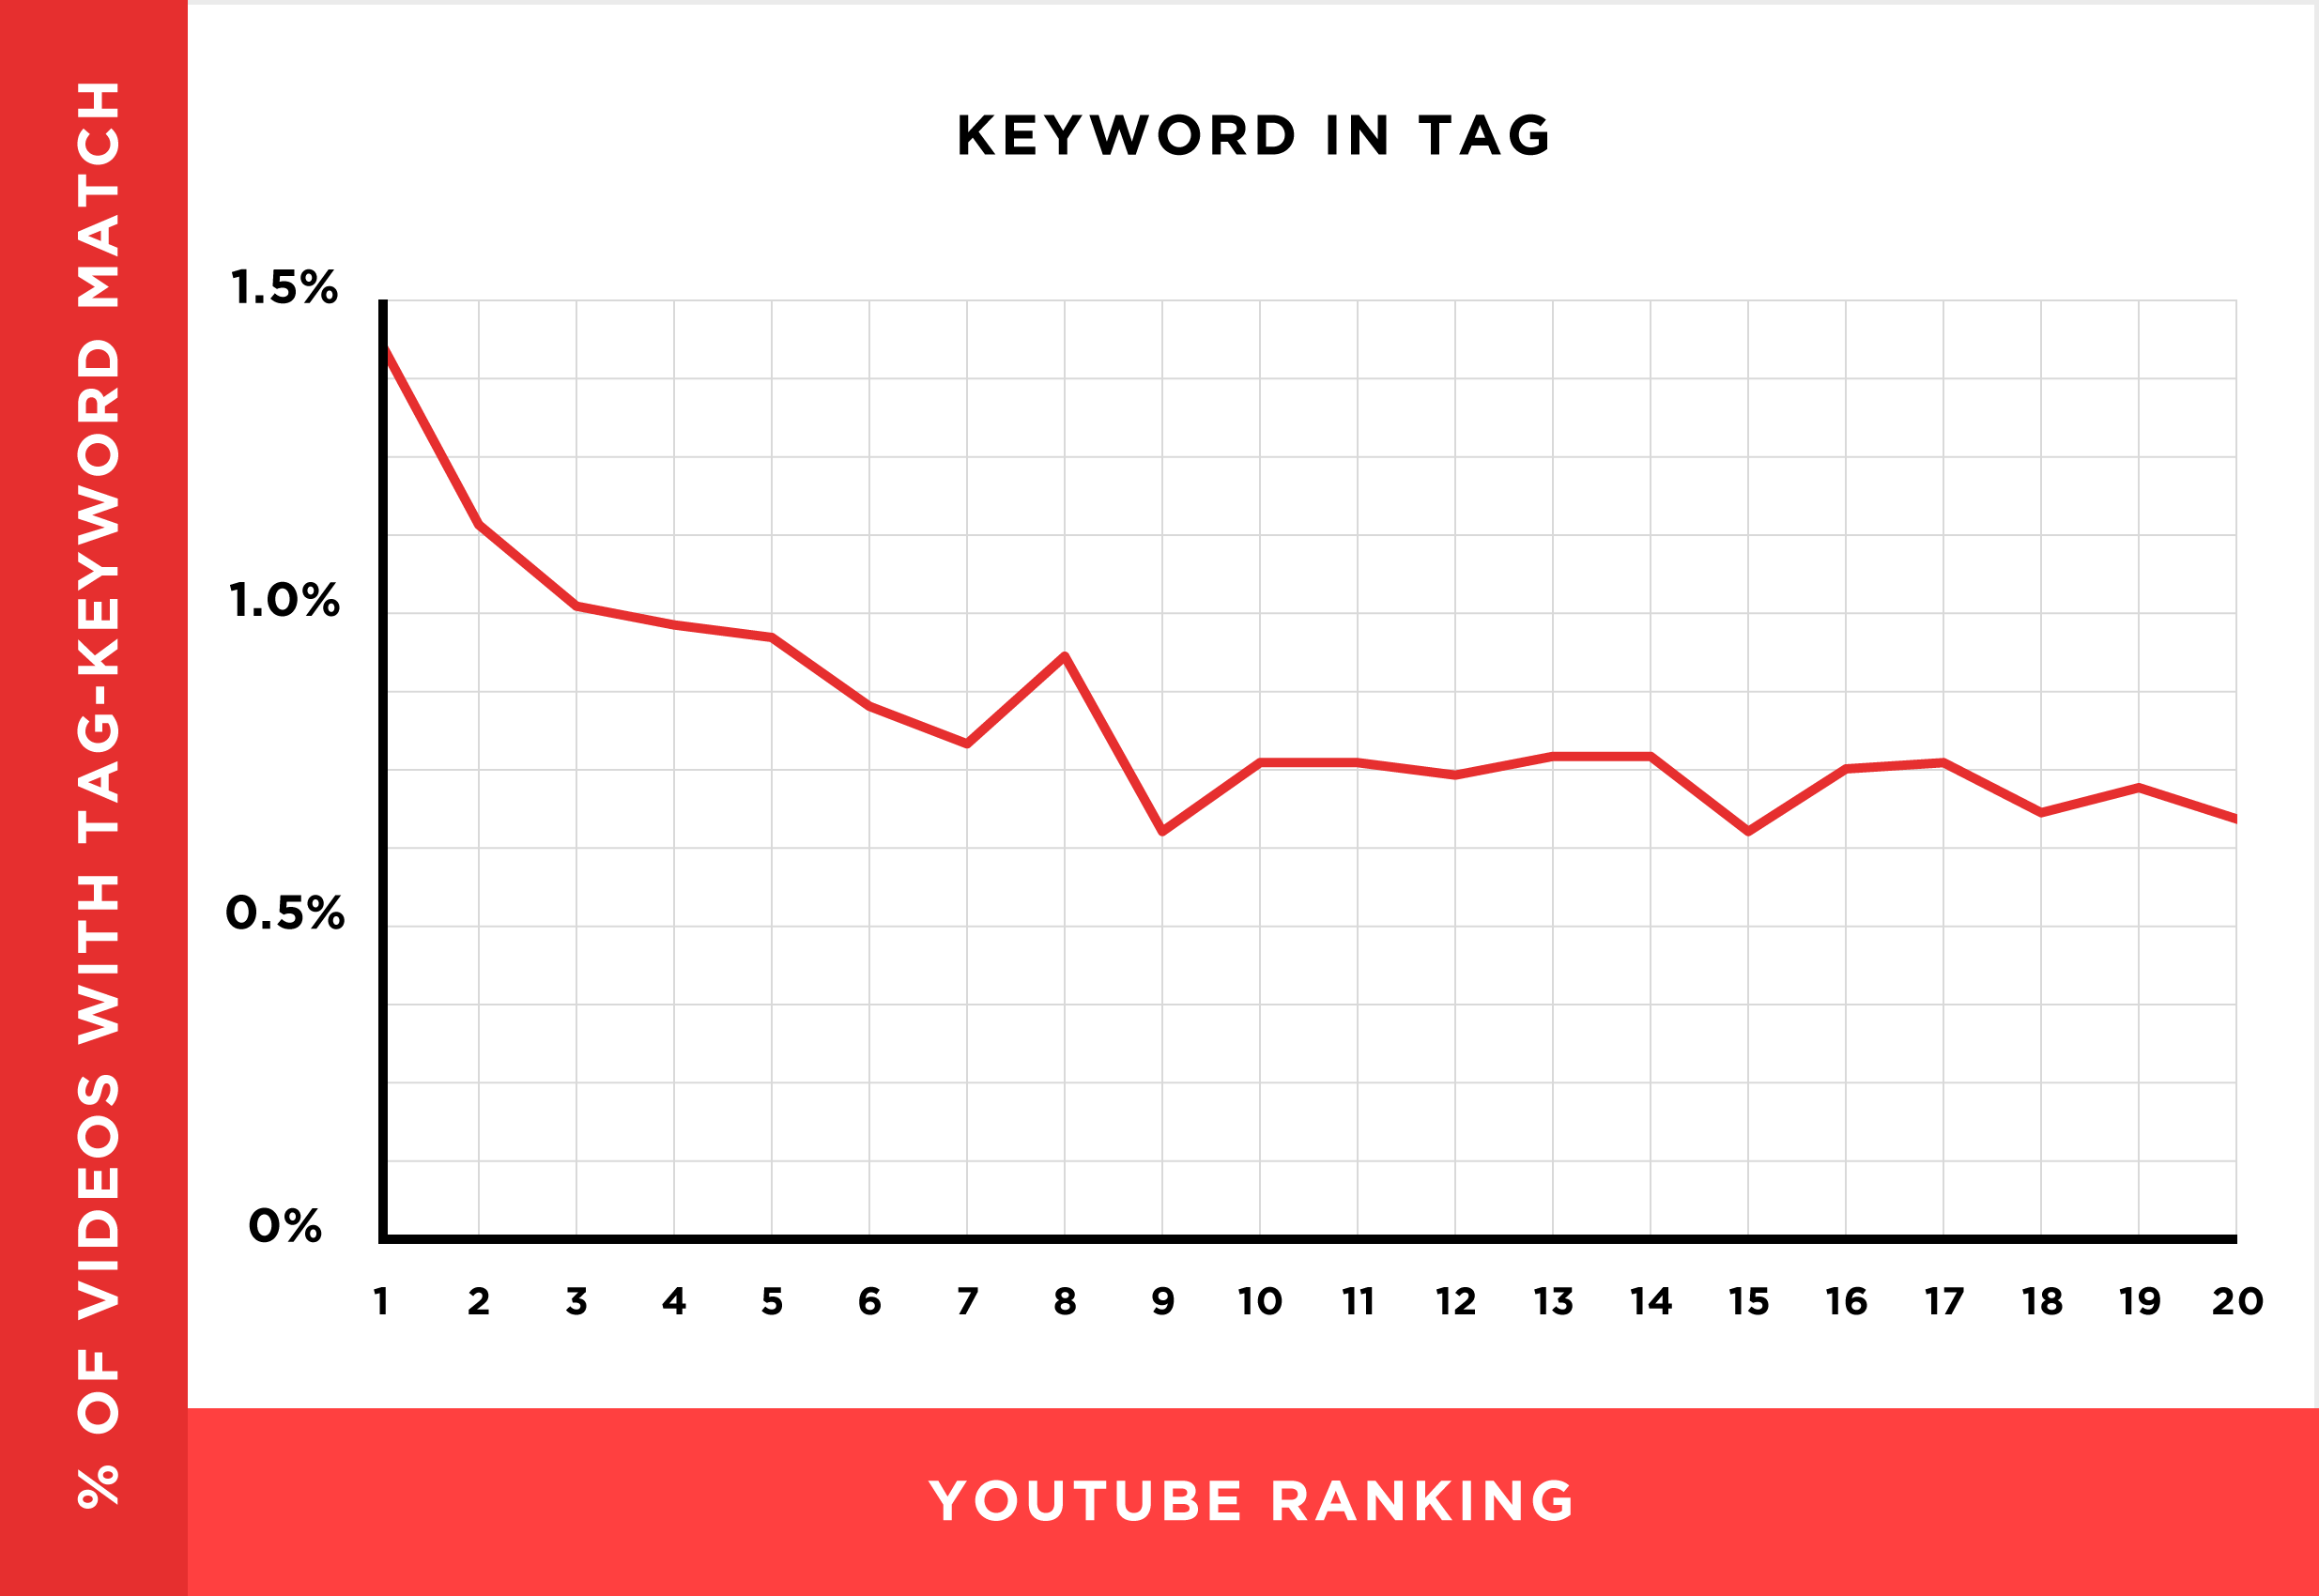 Relationship Between Keyword in Video Tags and Youtube Ranking